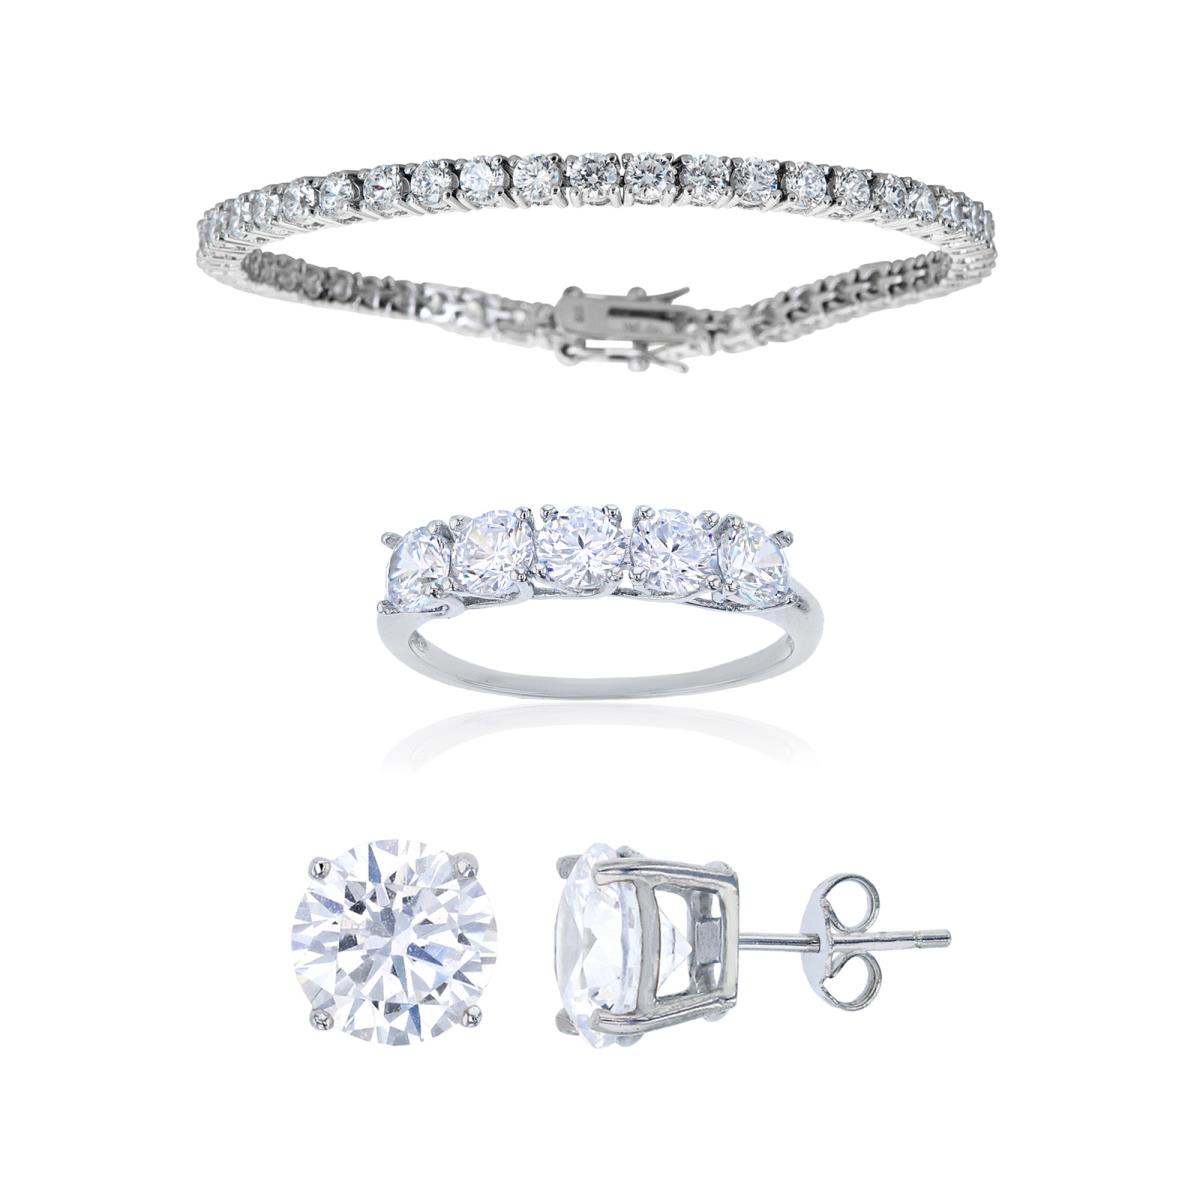 Sterling Silver Rhodium 4mm Rd Cut Anniversary Band, 3.5mm Rd Prong Set Tennis Bracelet & 8mm Solitaire Stud Earring Set